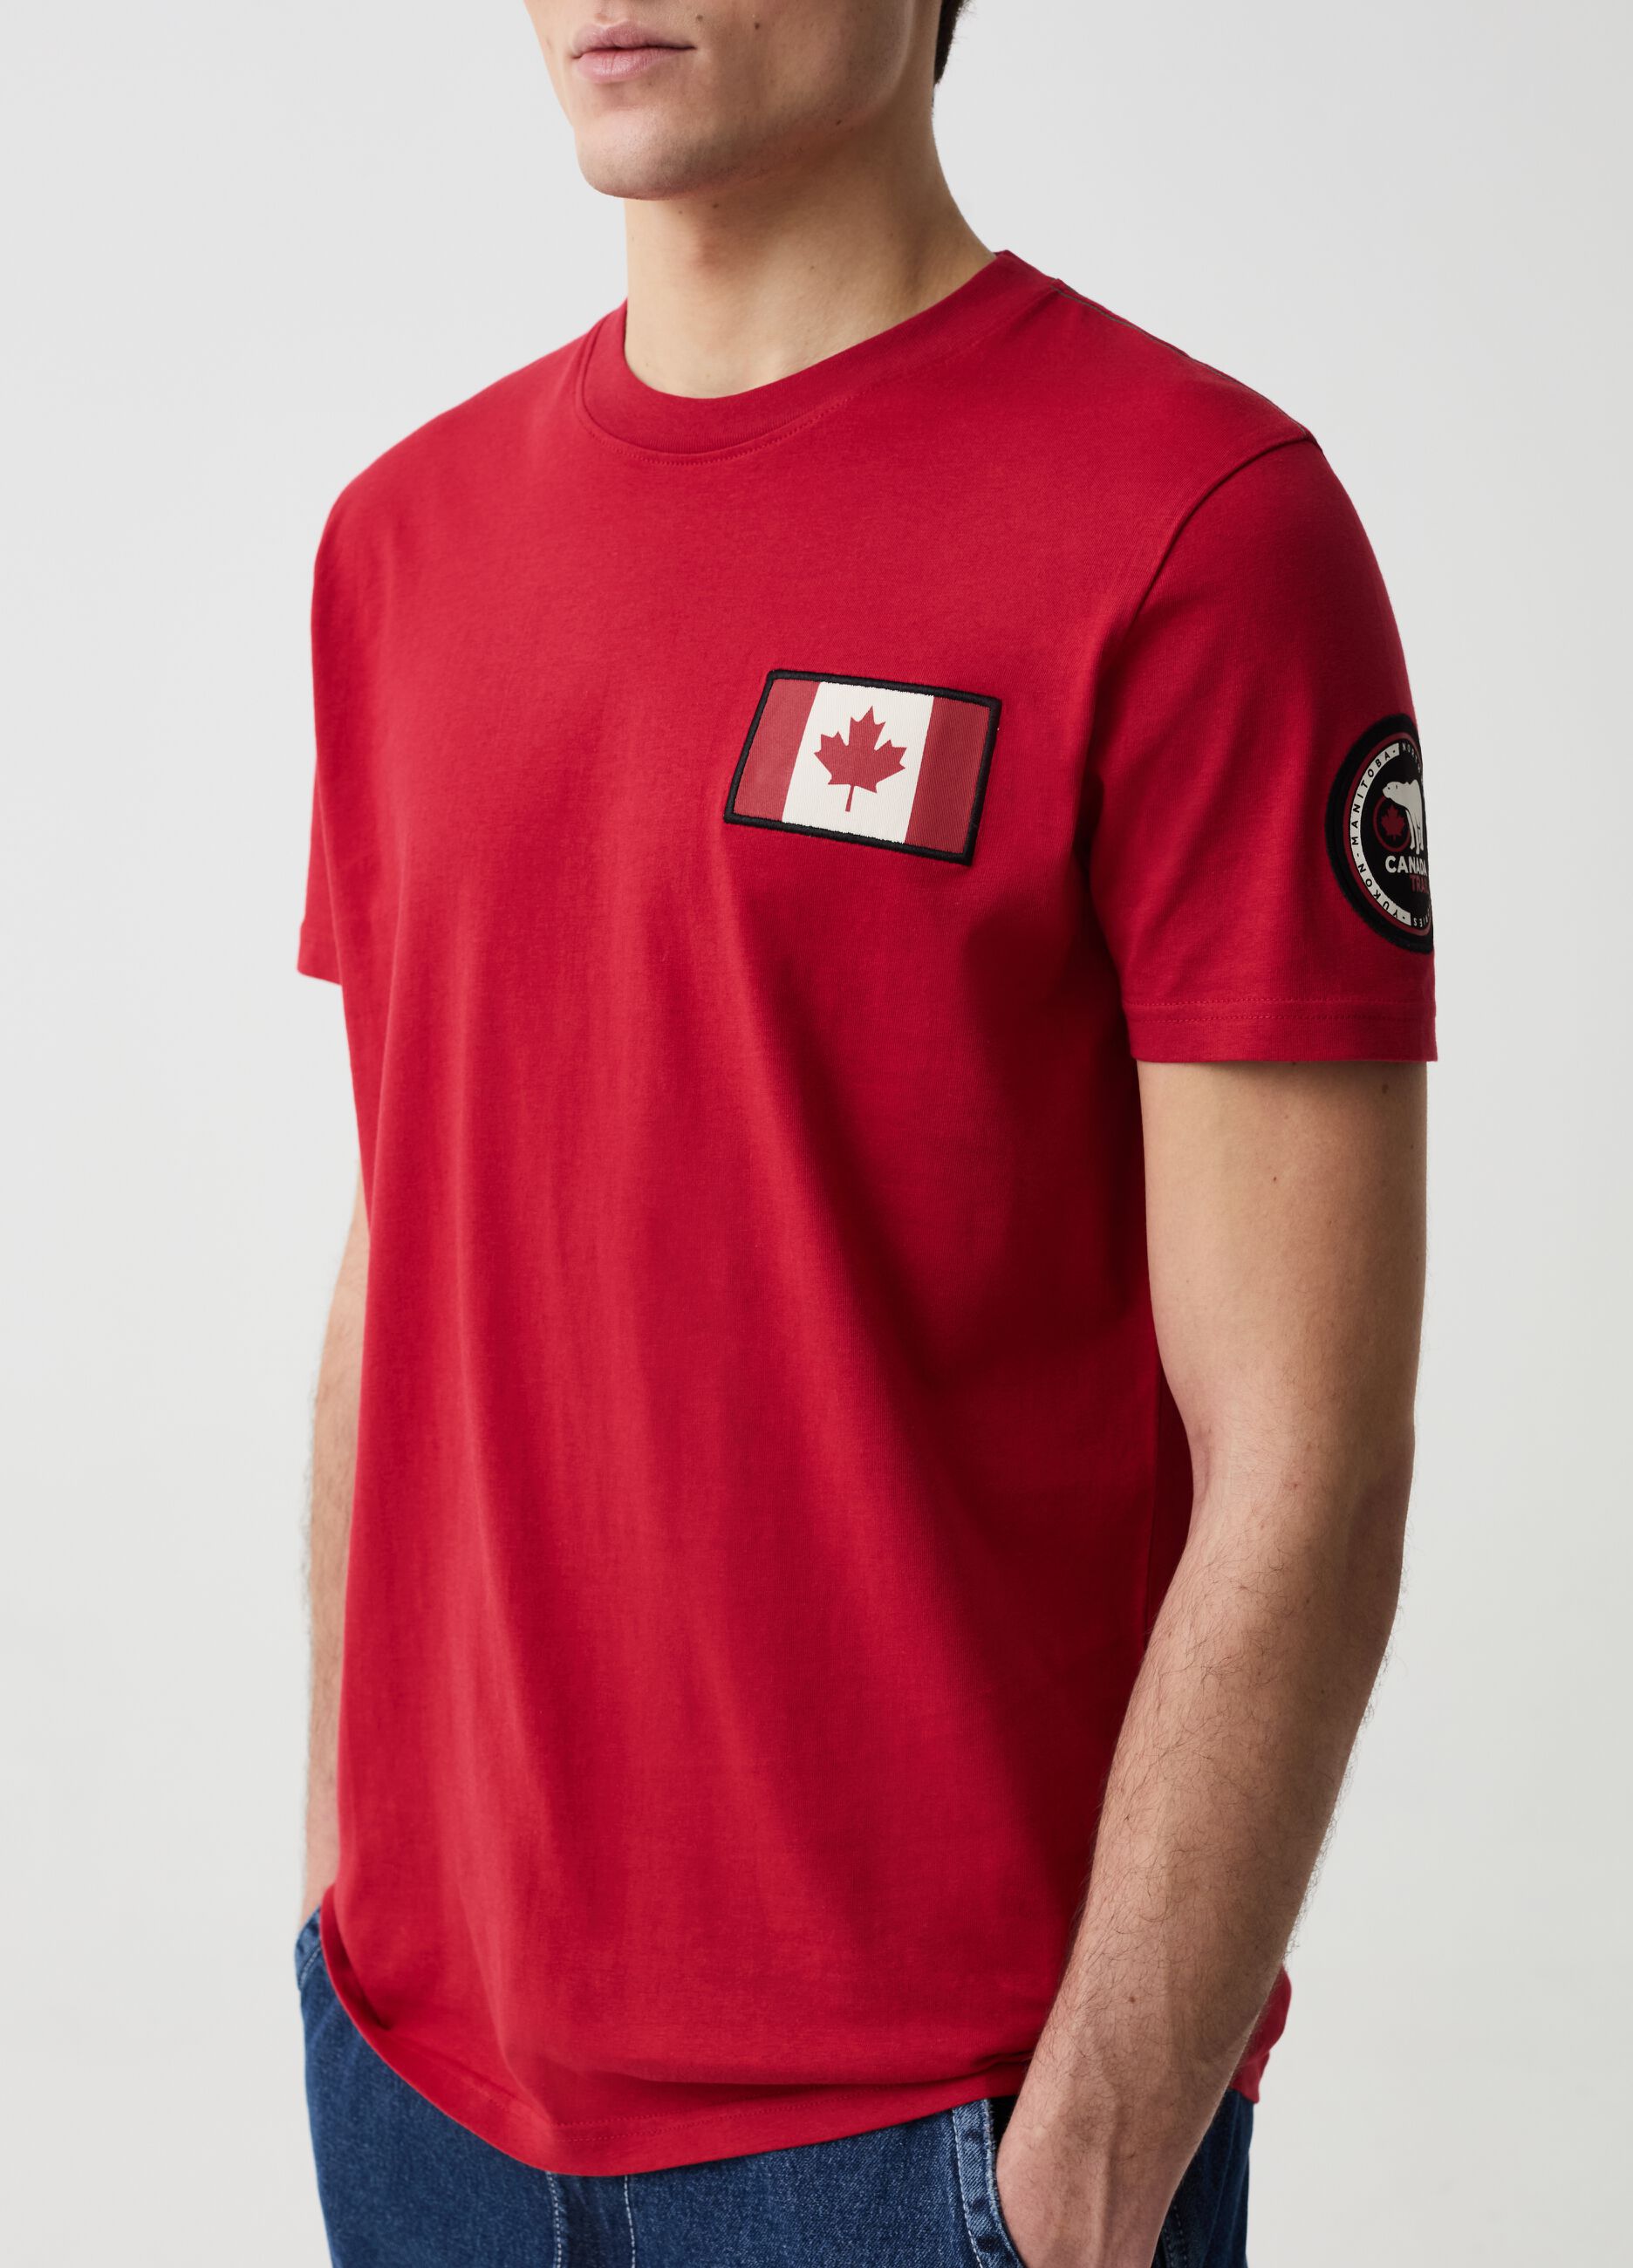 T-shirt with Canada Trail print and patch